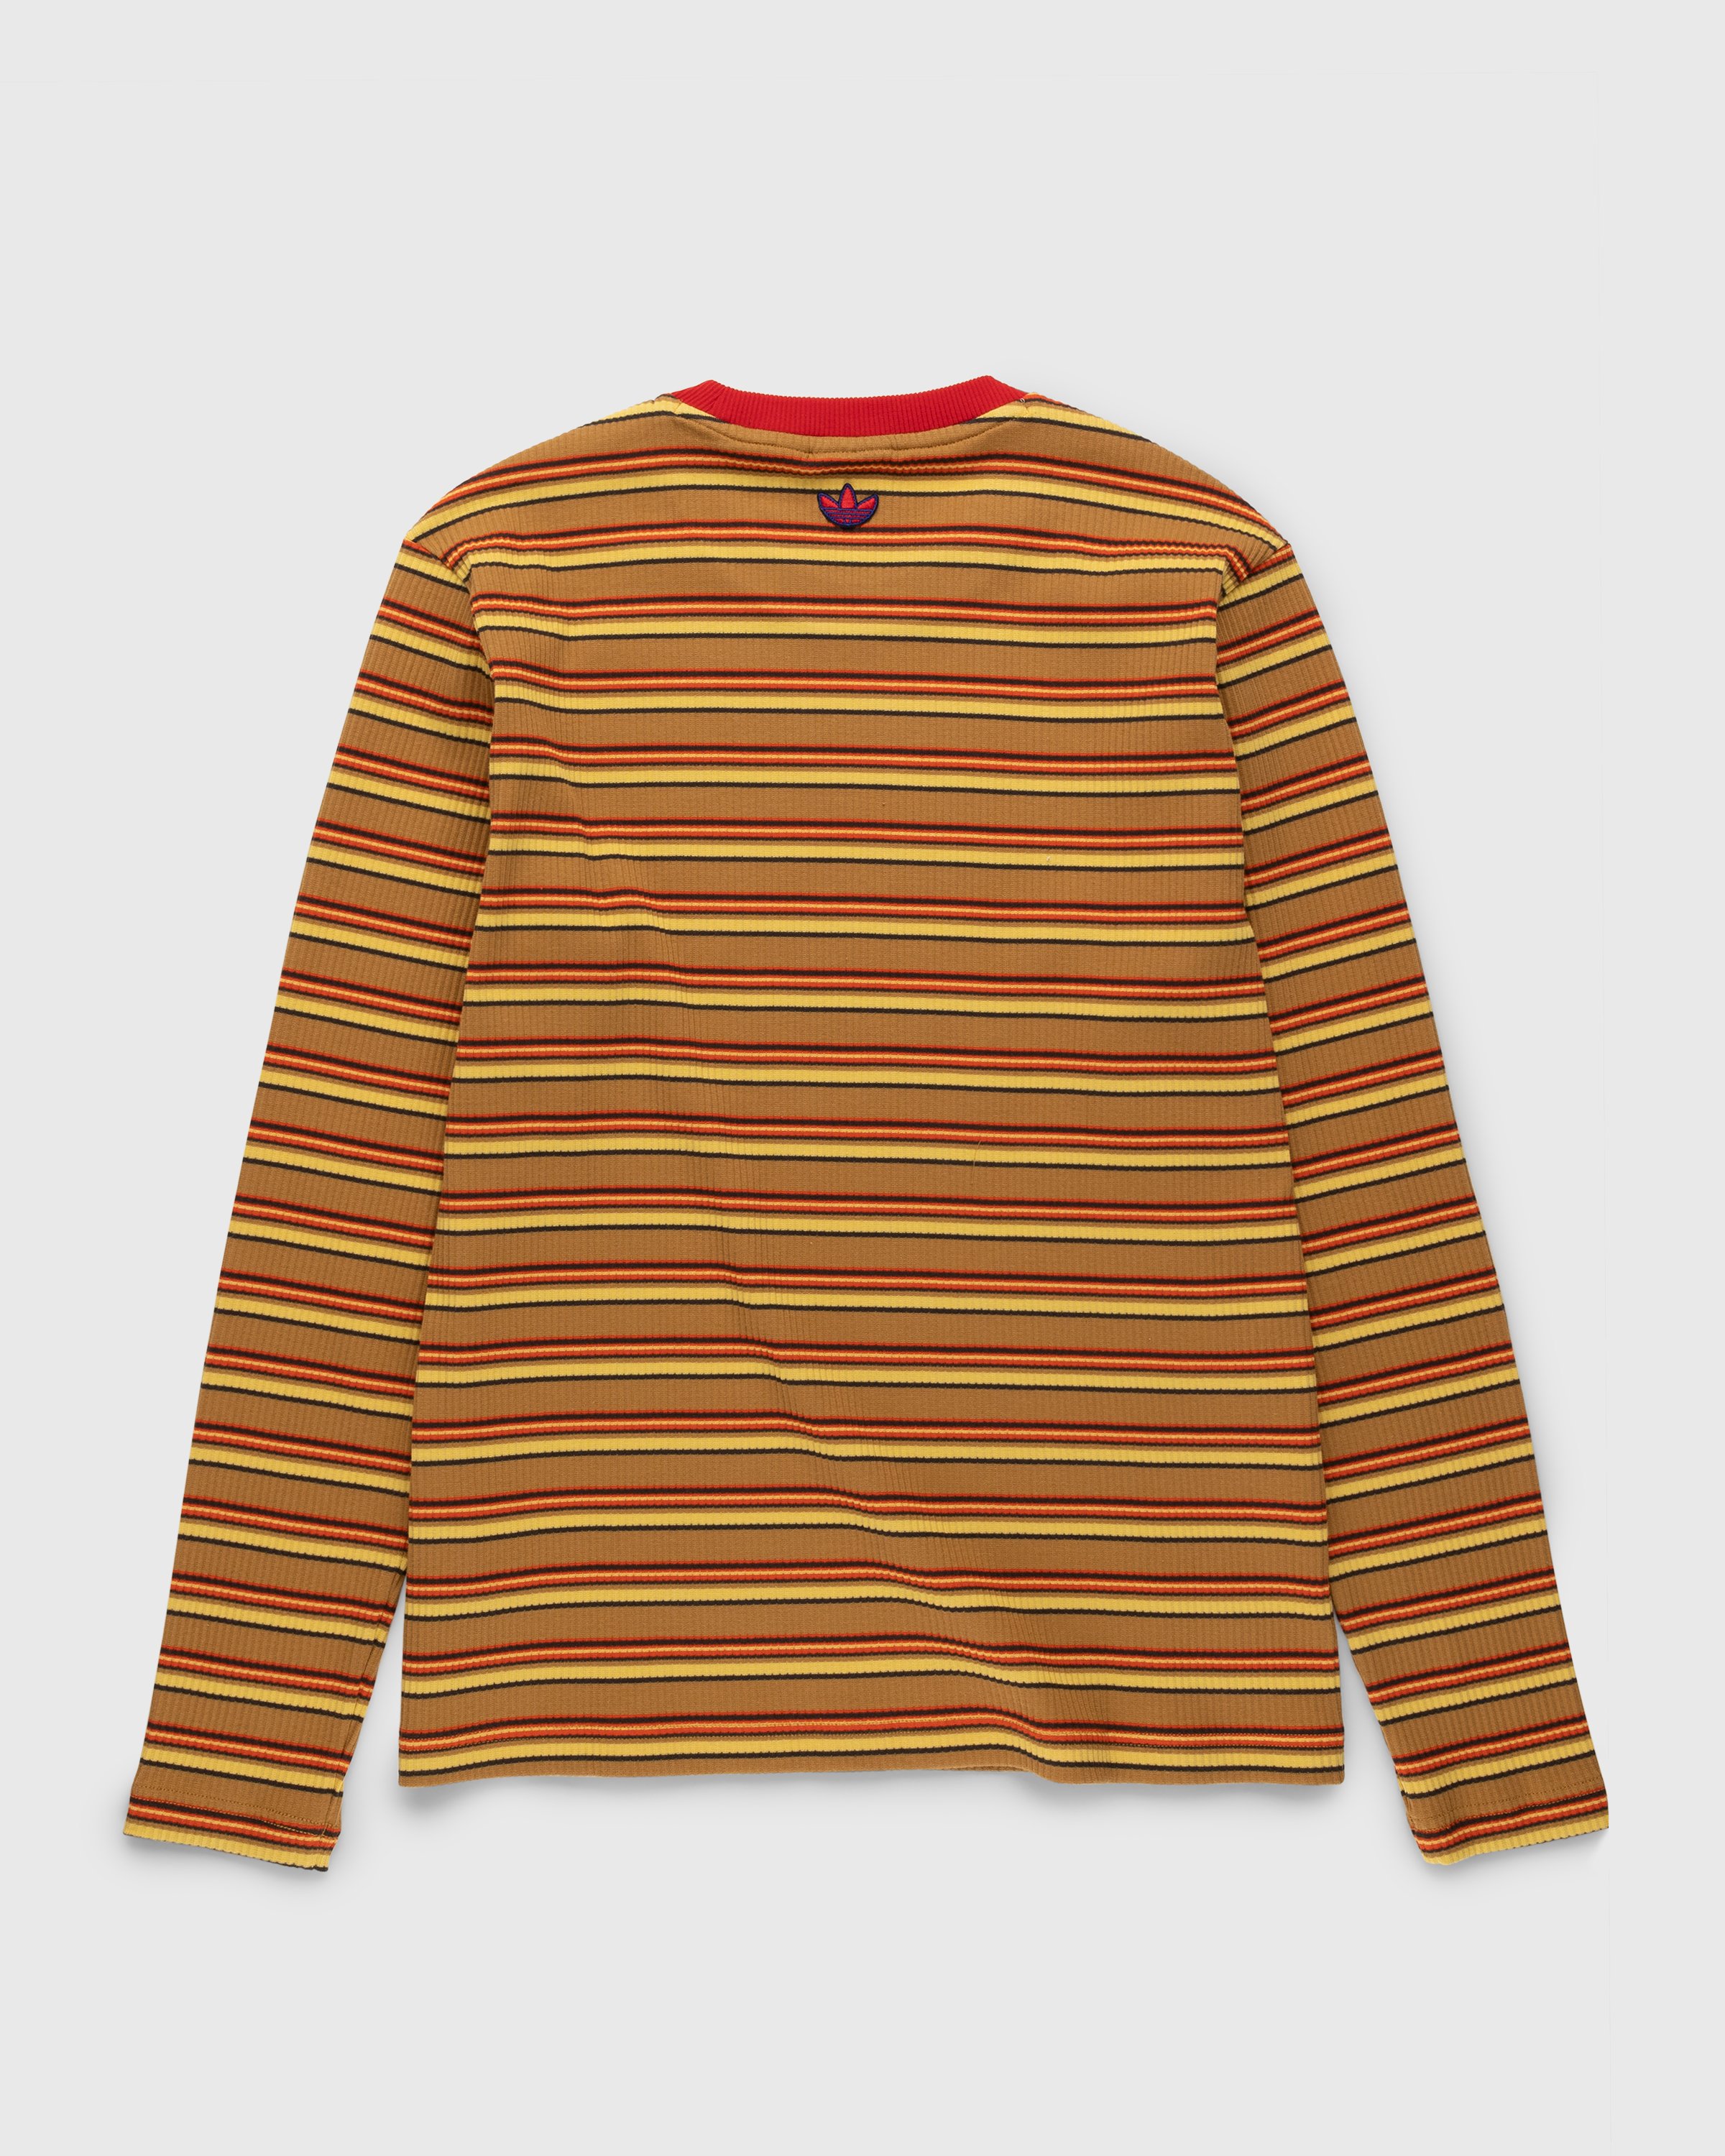 Adidas x Wales Bonner - WB Striped Longsleeve St Fade Gold/Scarlet - Clothing - Red - Image 2